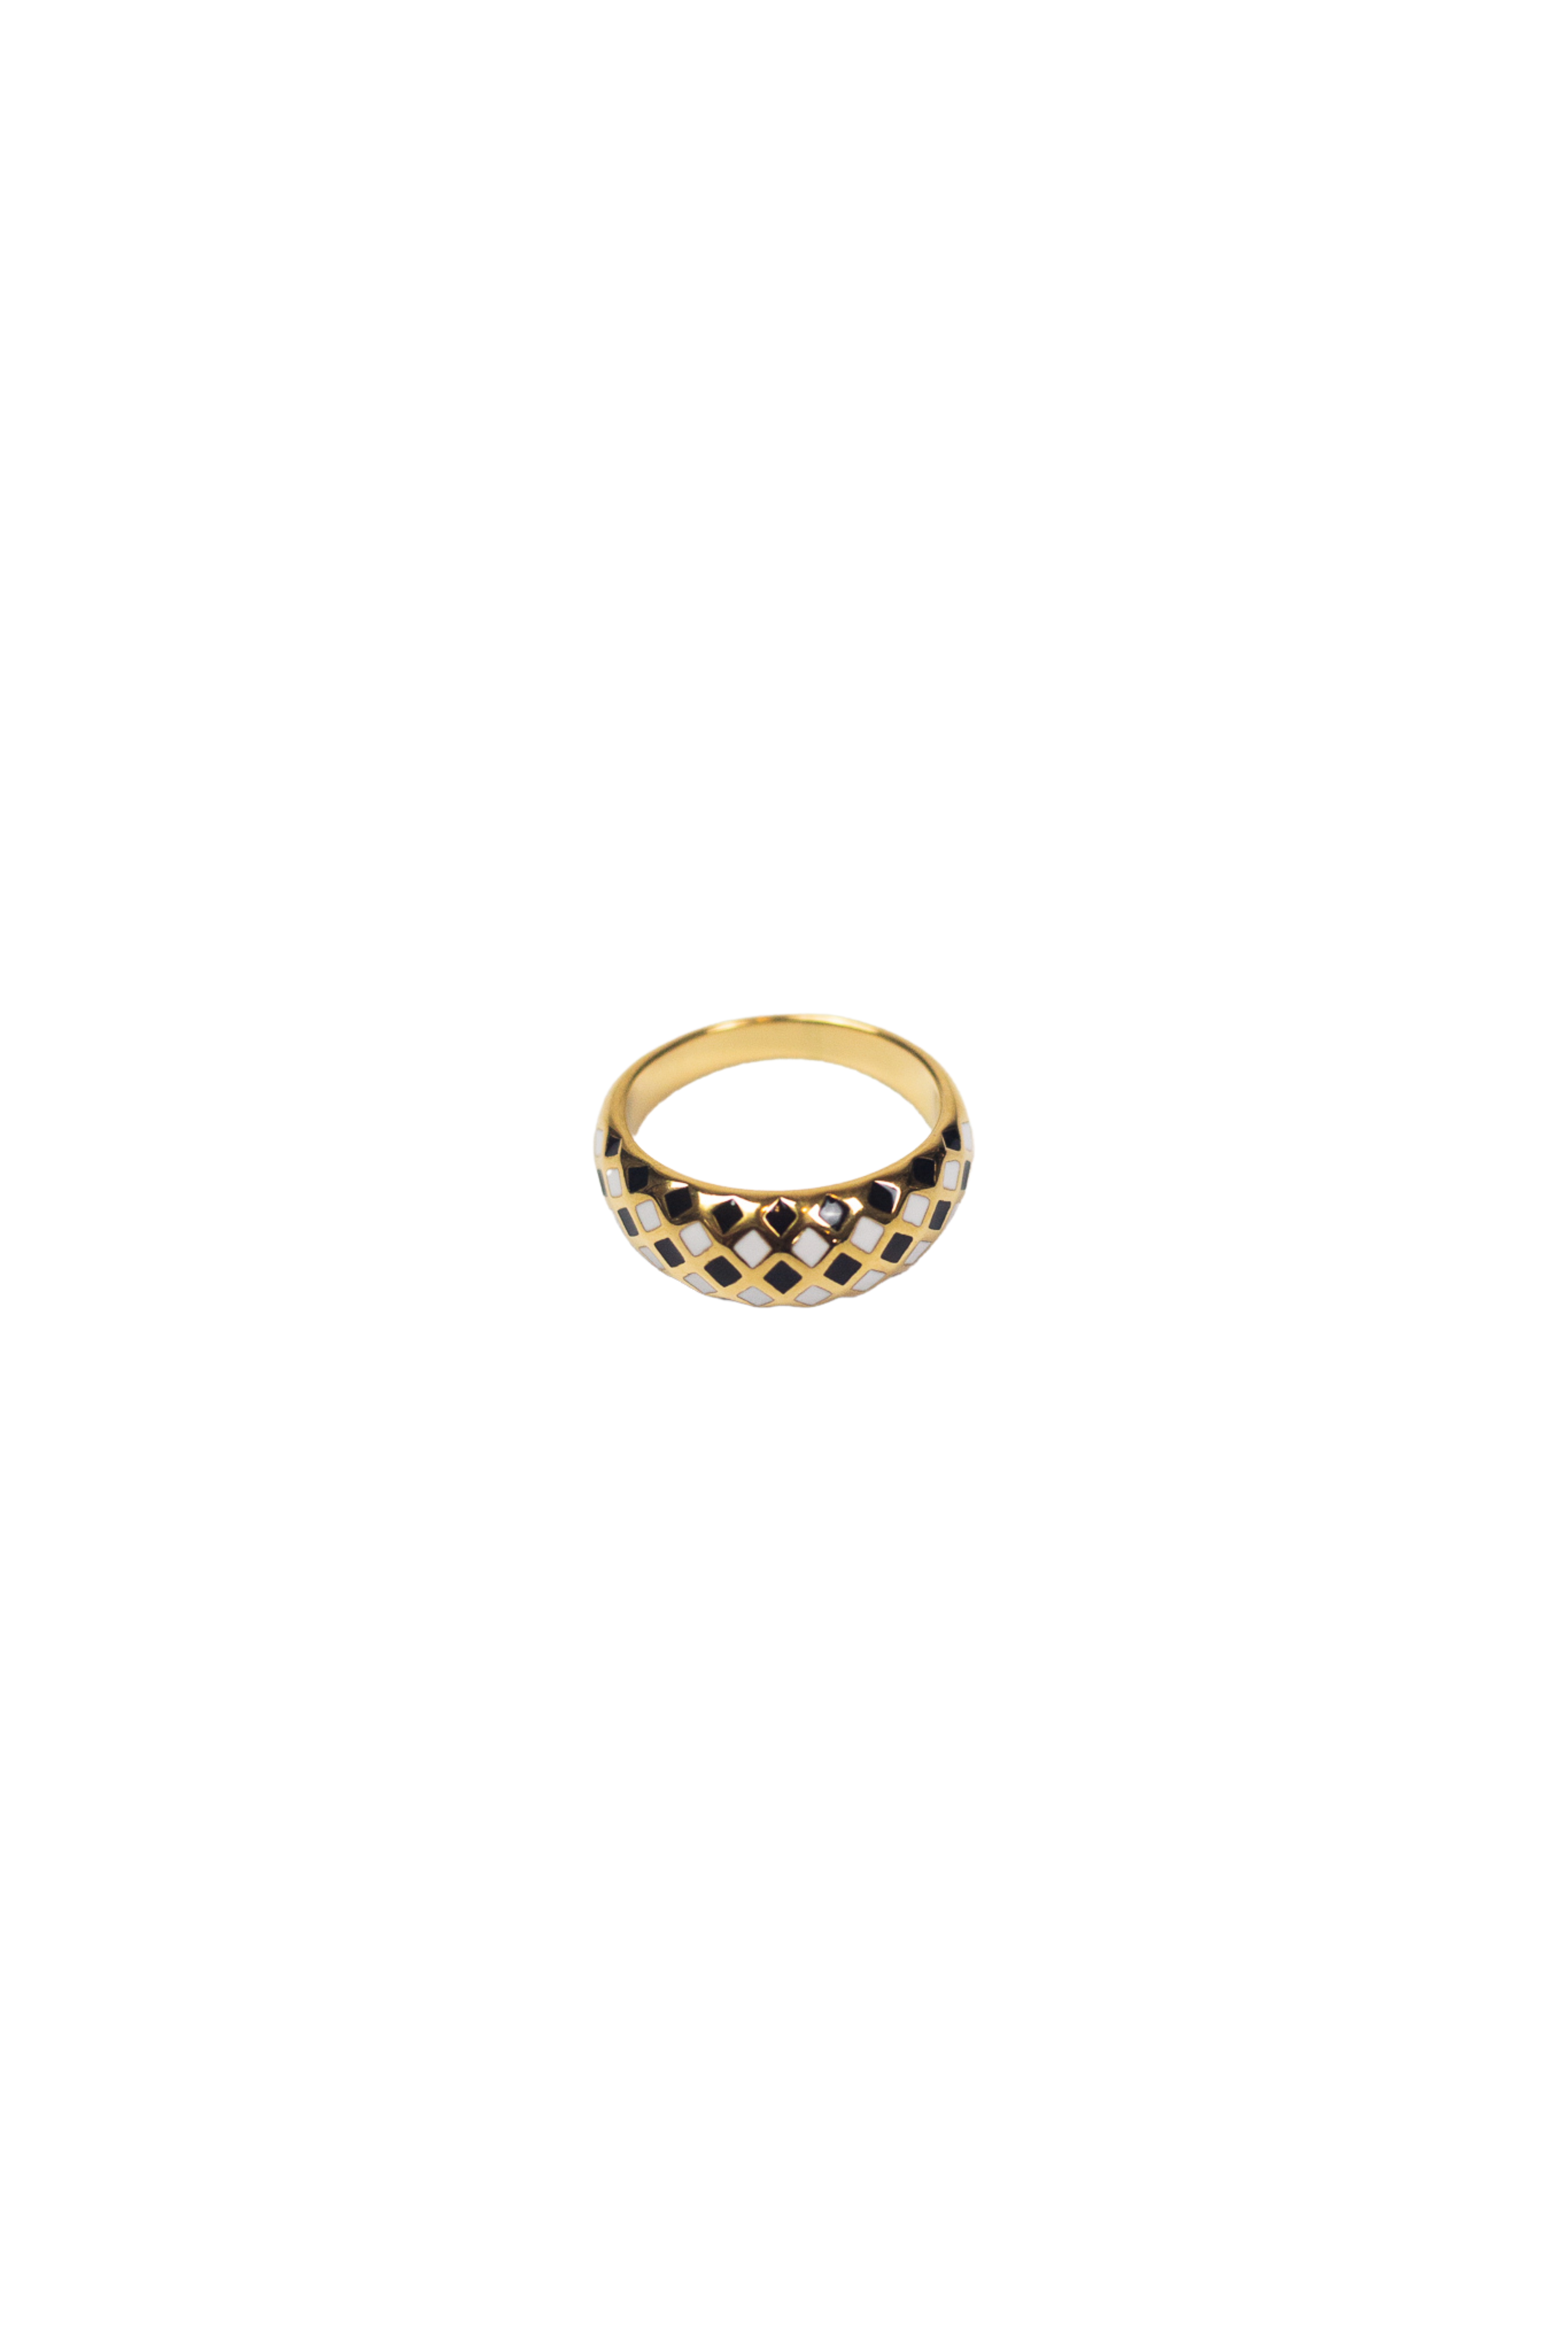 18k gold ring with black and yellow diamond dots. Minimalist Resin Ring by E's Element.